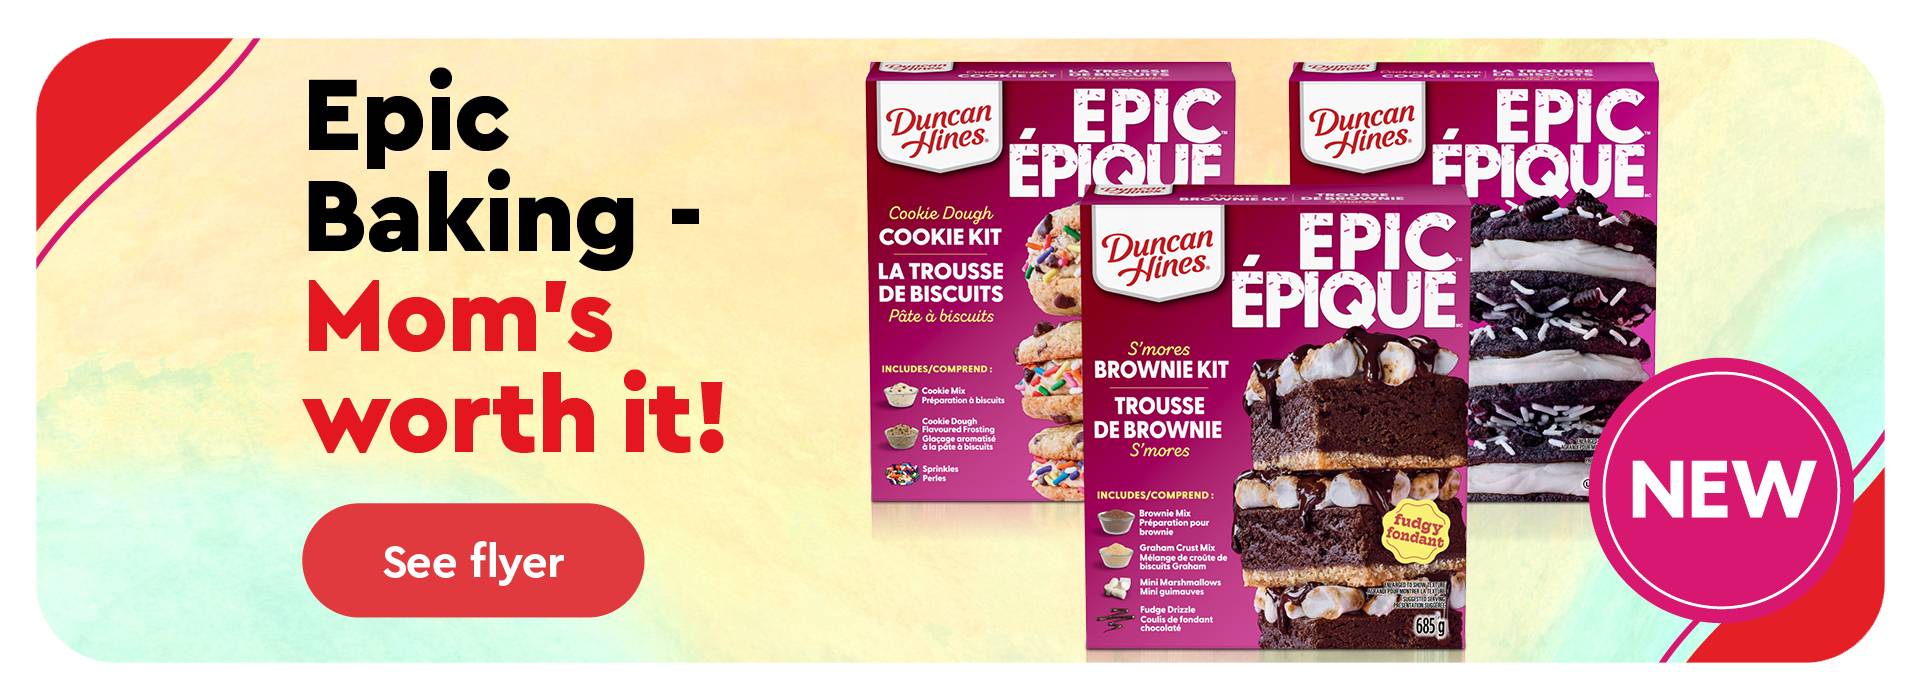 Text Reading 'Try our new Brownie and Cookie Kit to treat your mom's epic baking worth it! 'See flyer' from the button given below.'